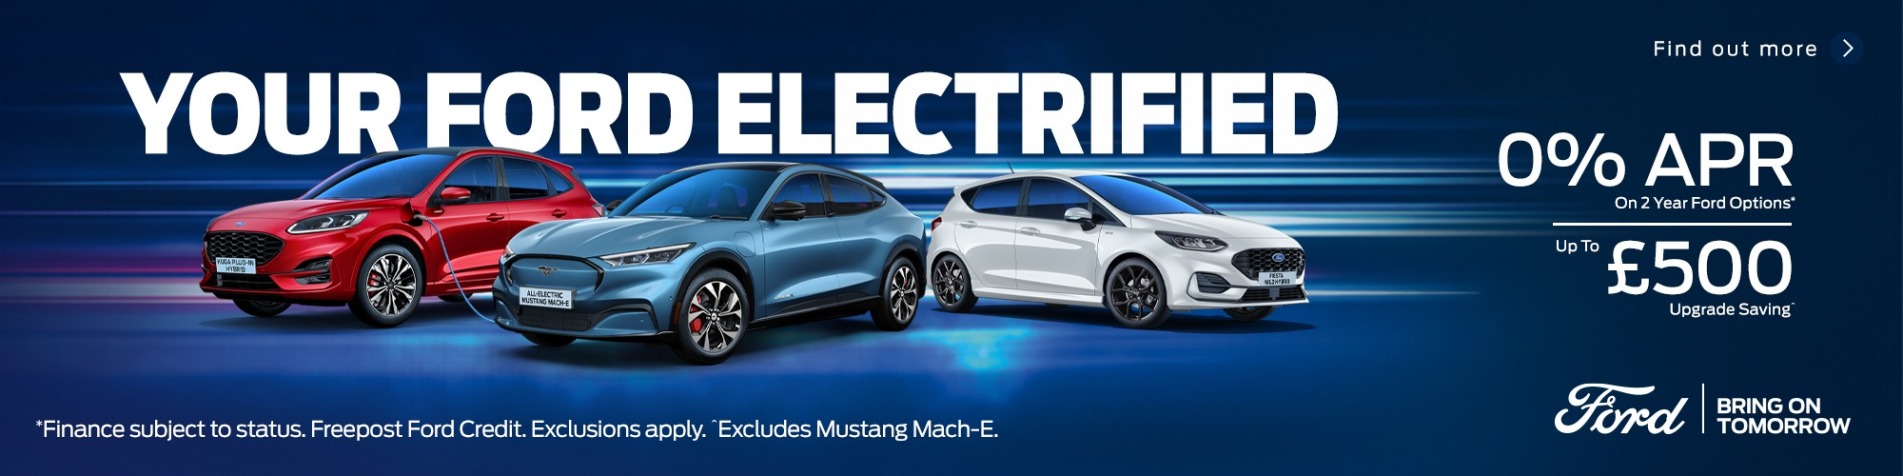 Your Ford Electrified Banner Q1 23